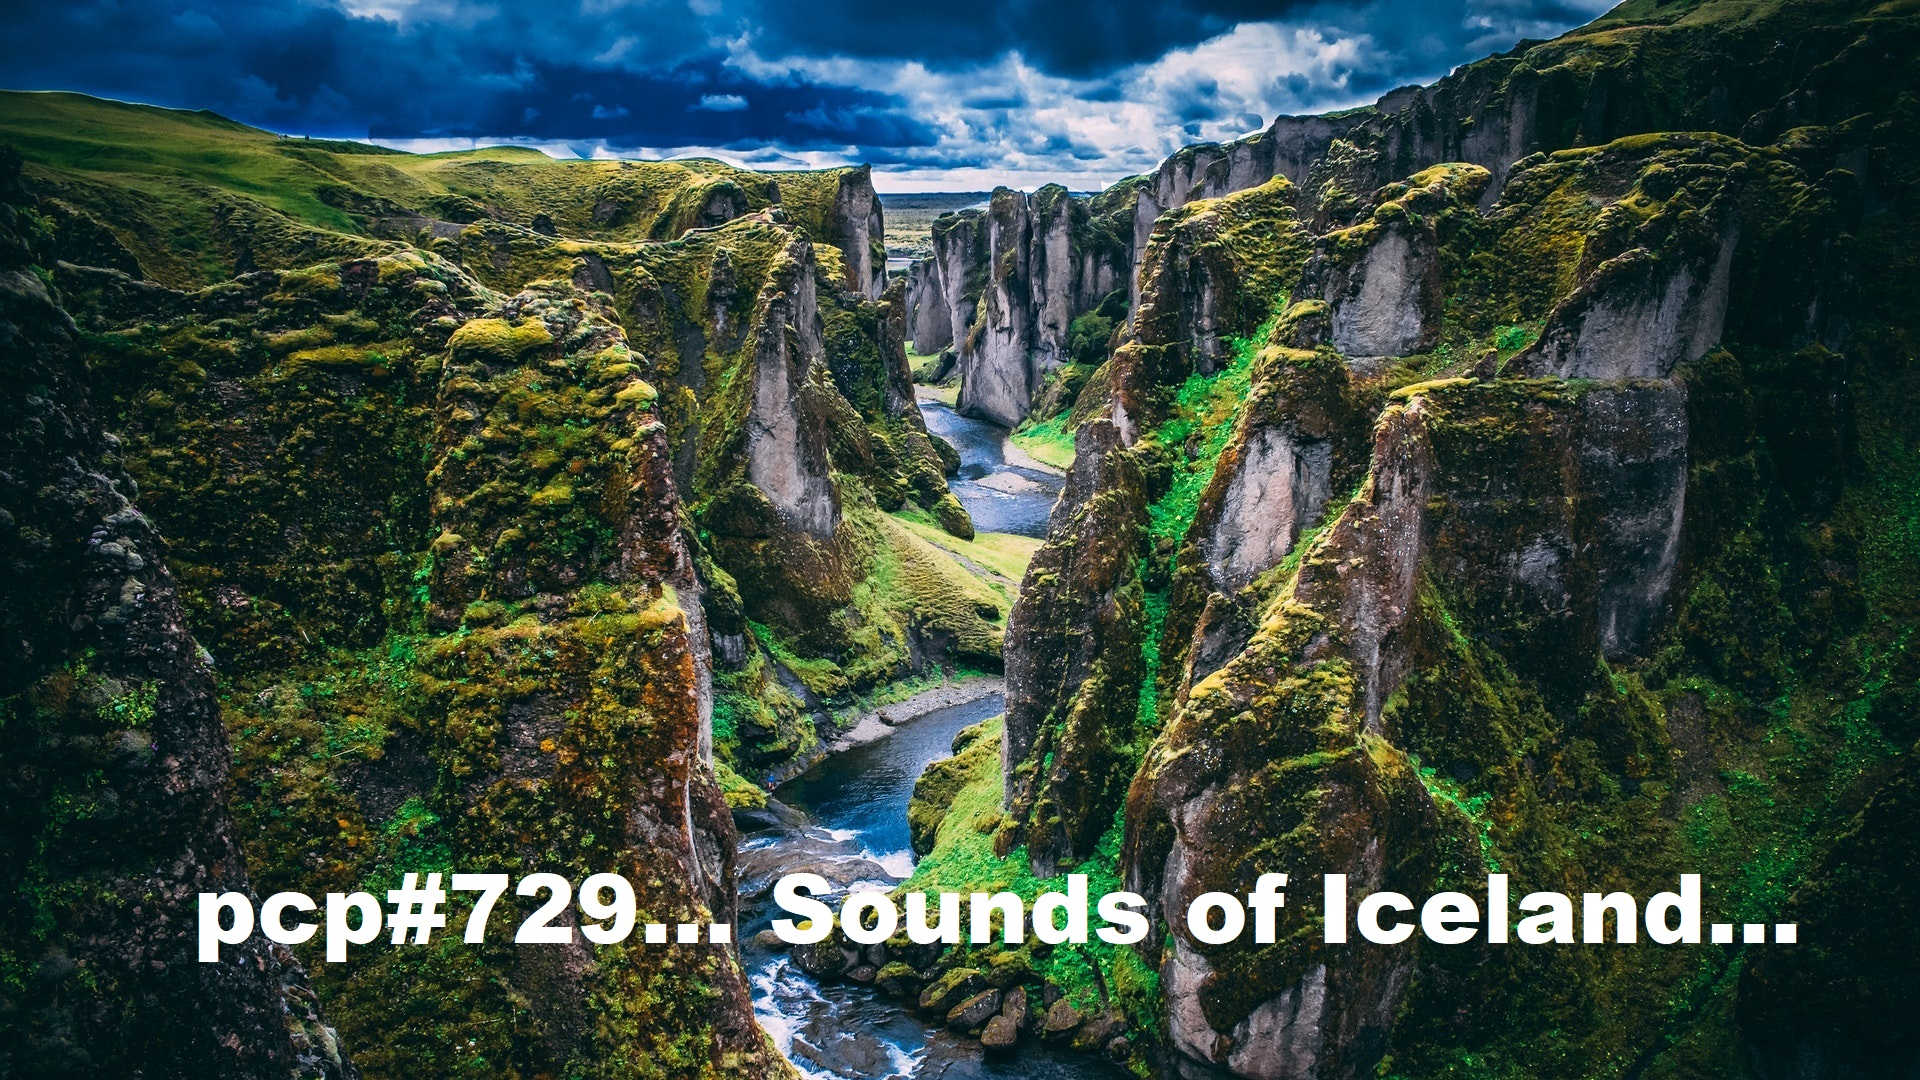 PCP#729... Sounds of Iceland....